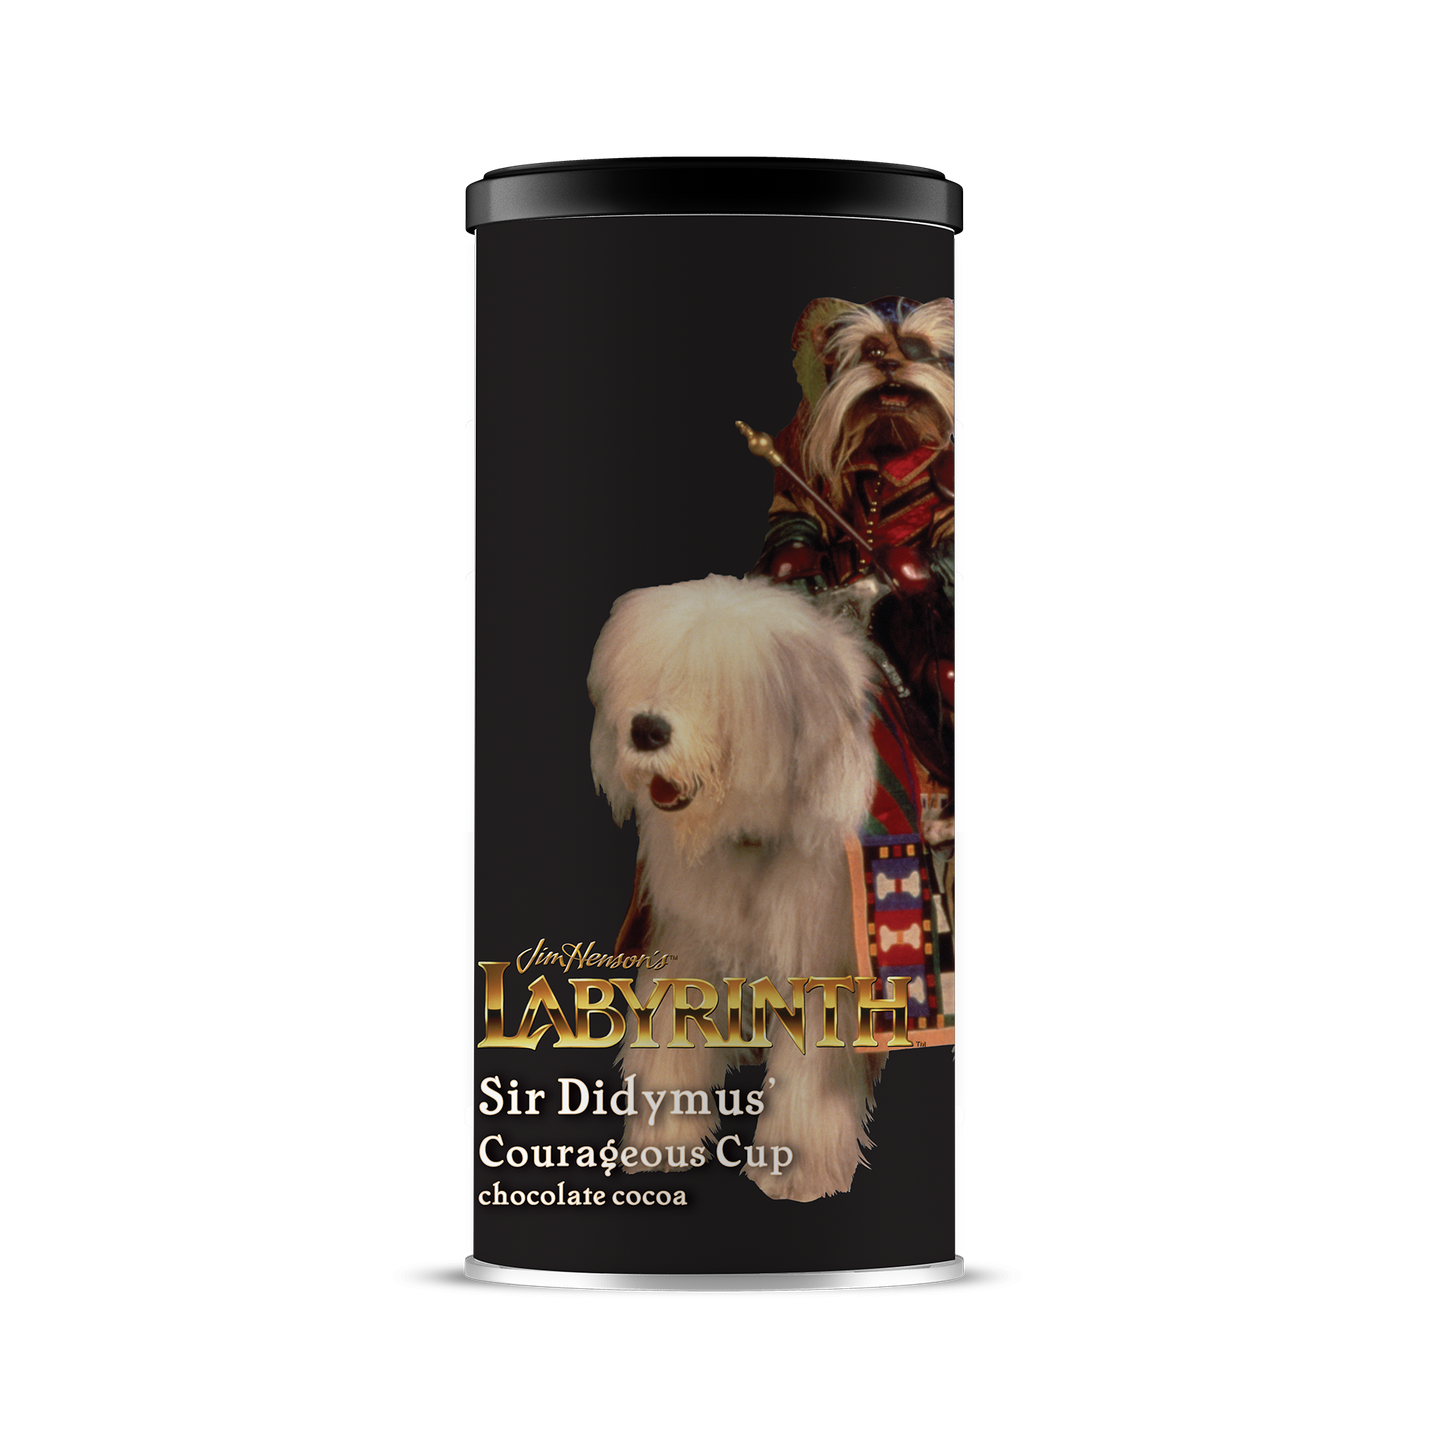 Sir Didymus' Courageous Cup : Chocolate Cocoa